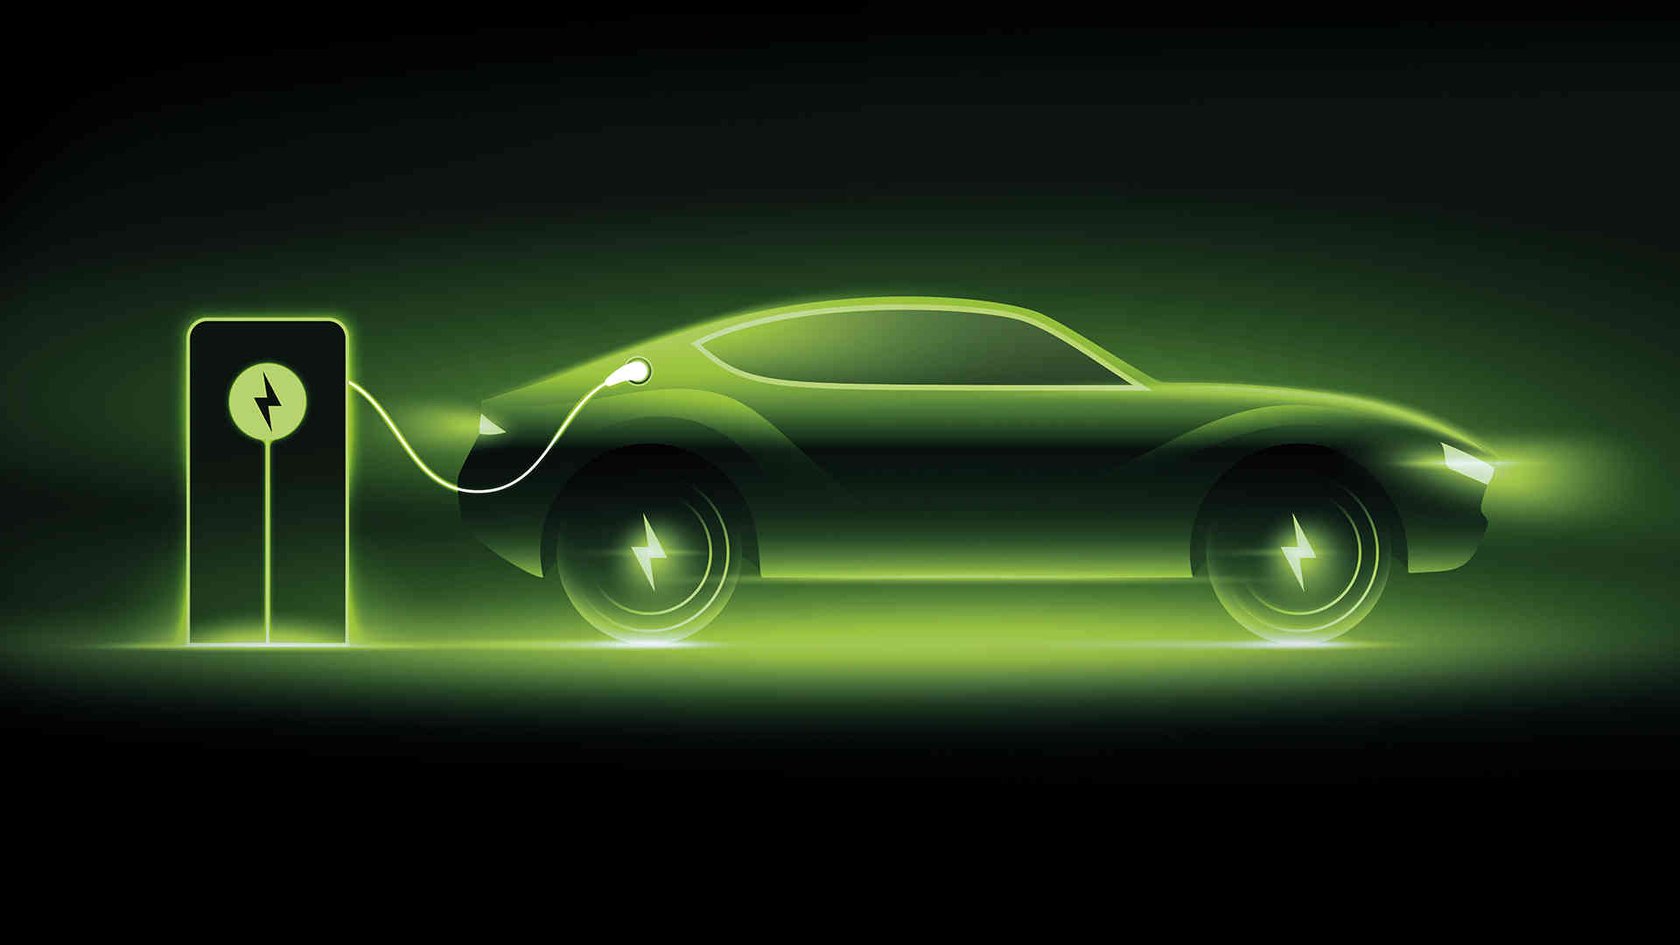 Neon green electric vehicle on a black background being charged 